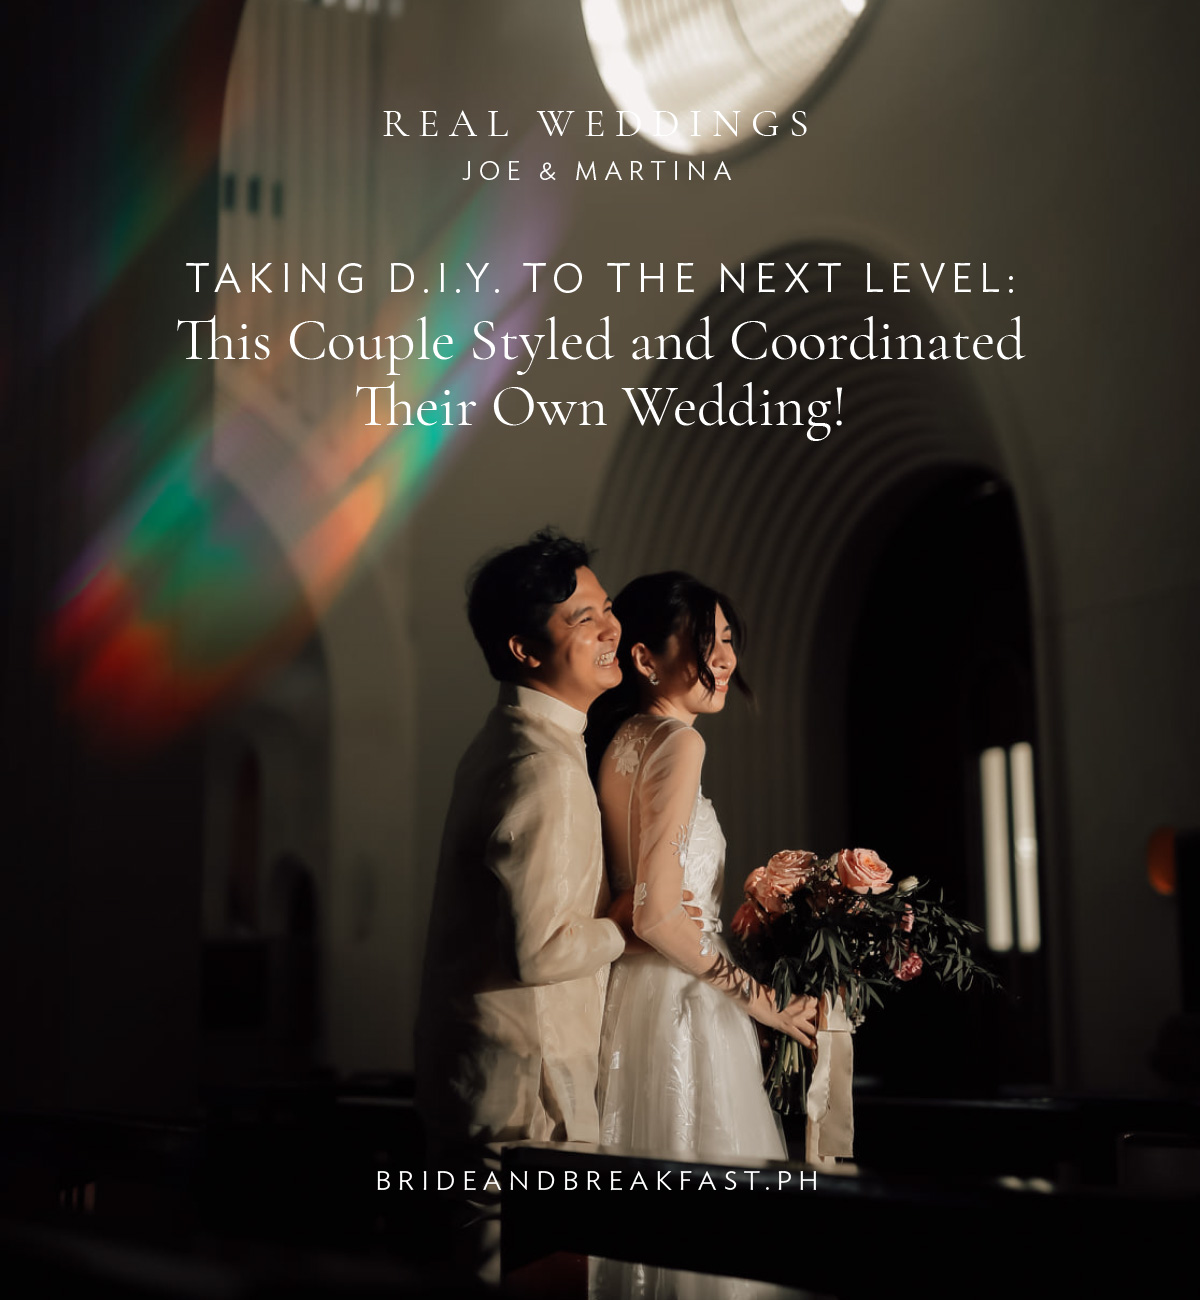 Taking D.I.Y. to the Next Level: This Couple Styled and Coordinated Their Own Wedding!